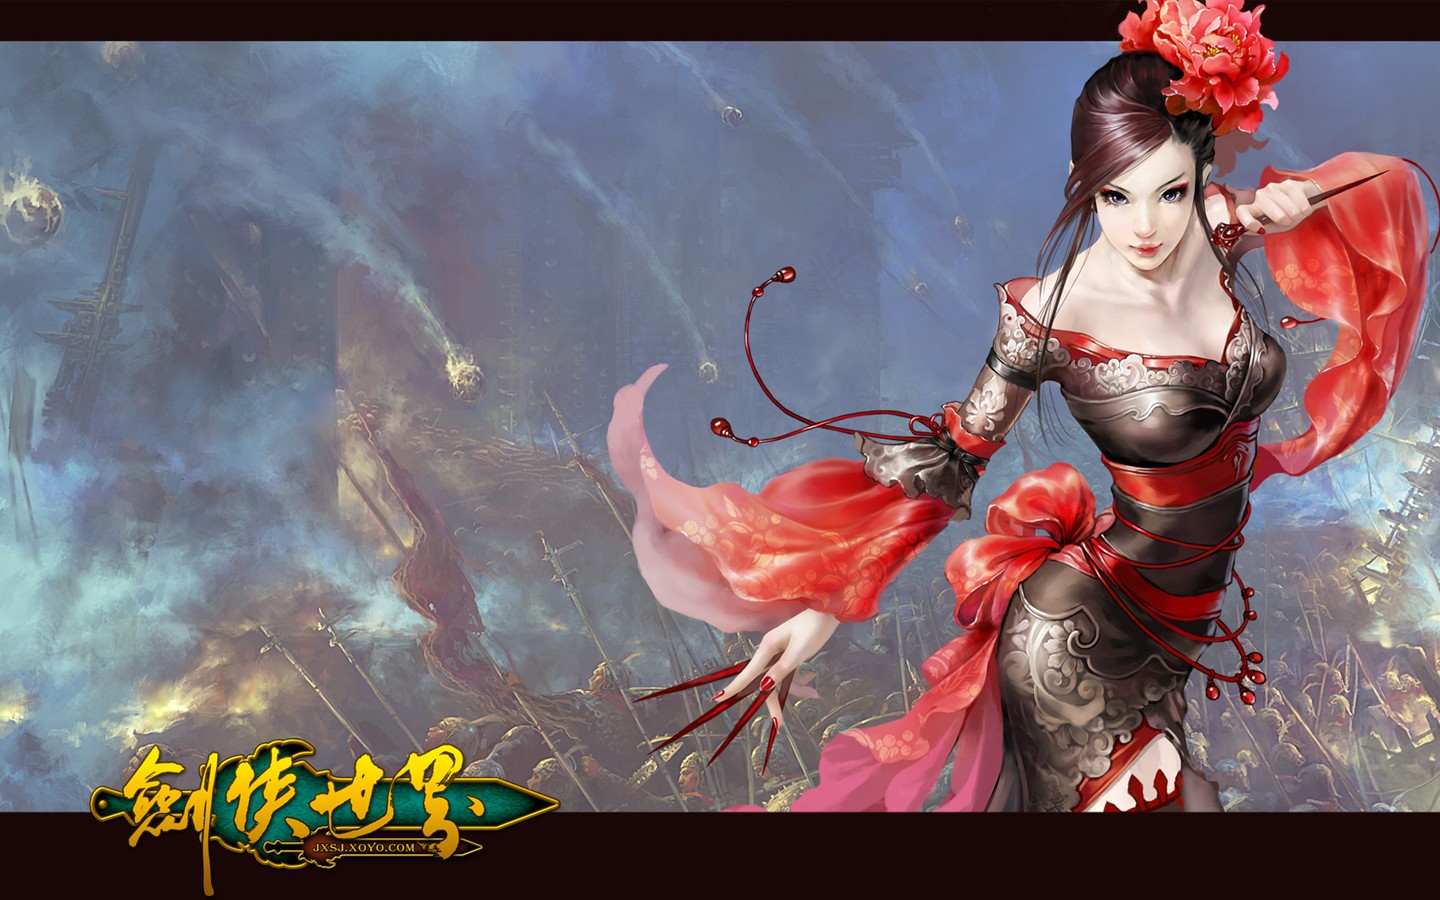 D Of The Swordsman In The World Martial Arts Online - Chinese Female Warrior Animation , HD Wallpaper & Backgrounds